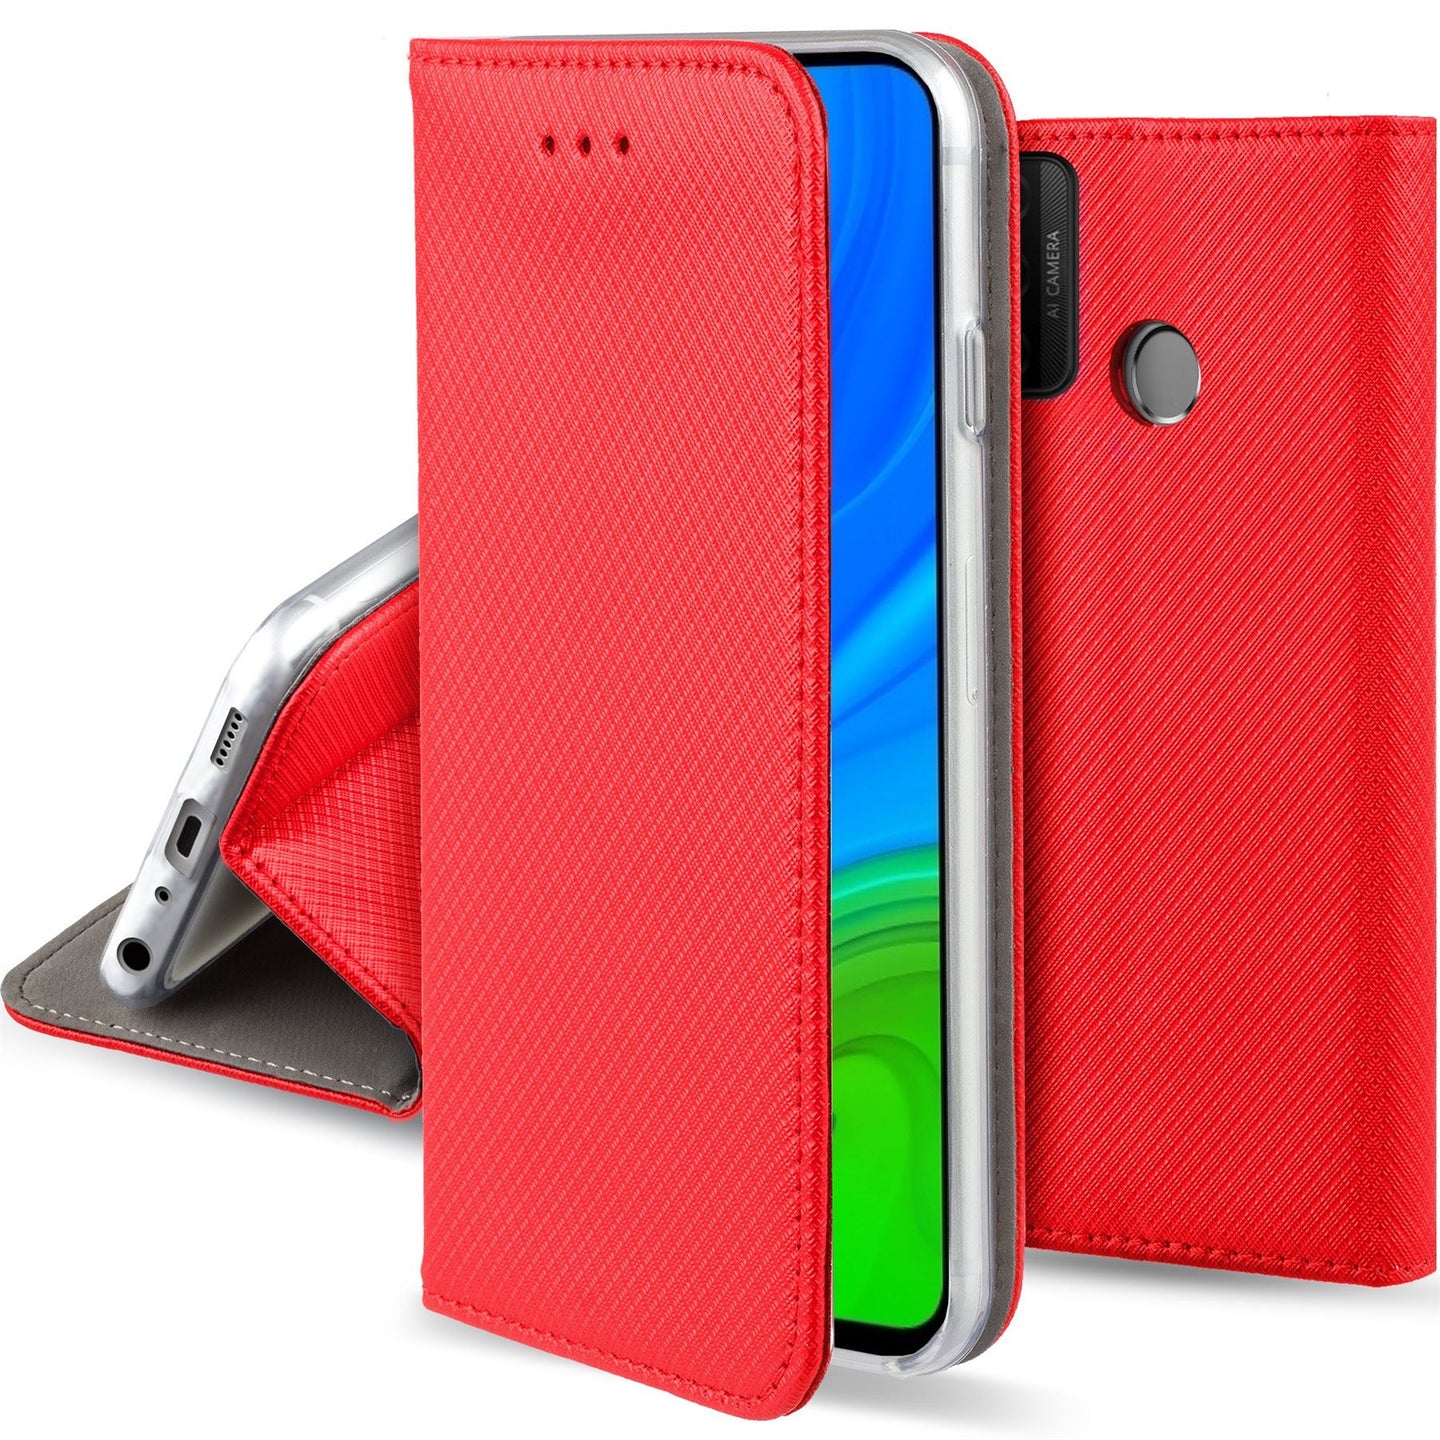 Moozy Case Flip Cover for Huawei P Smart 2020, Red - Smart Magnetic Flip Case with Card Holder and Stand